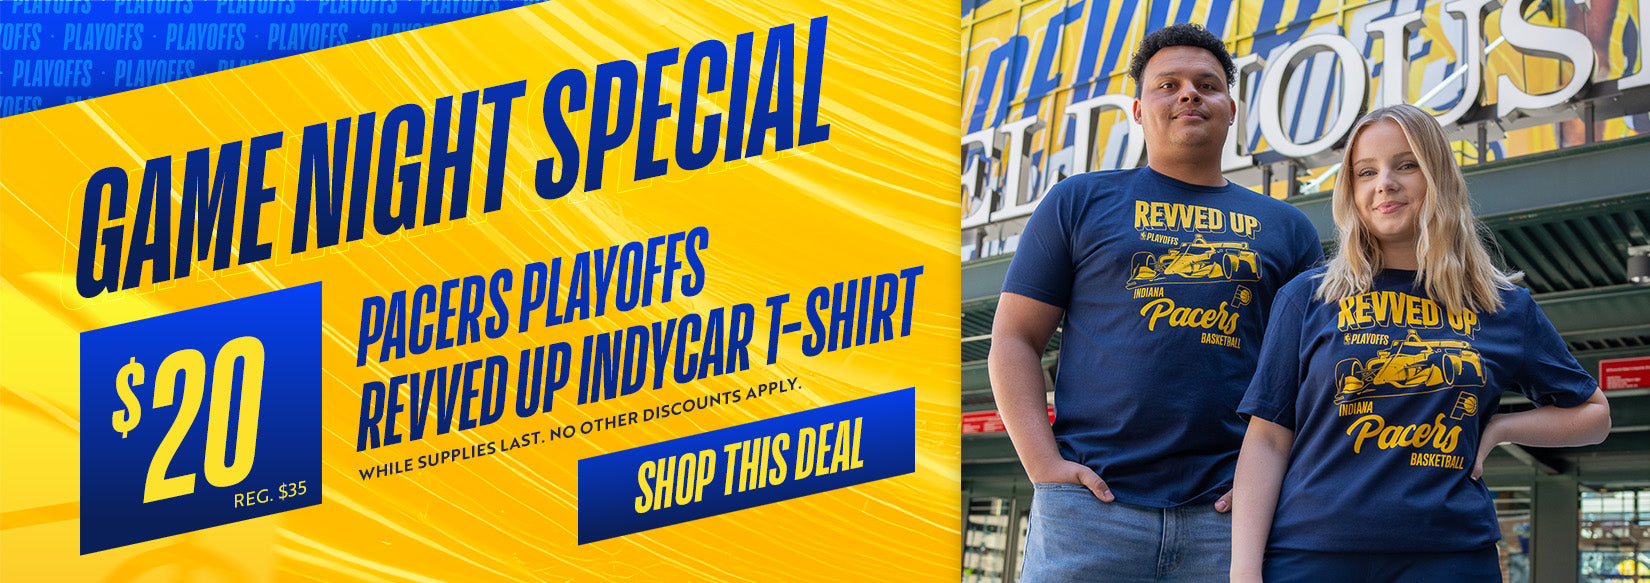 Game Night Special Pacers Playoffs Revved Up IndyCar T-Shirt $20 reg. $35 WHILE SUPPLIES LAST. NO OTHER DISCOUNTS APPLY. SHOP THIS DEAL